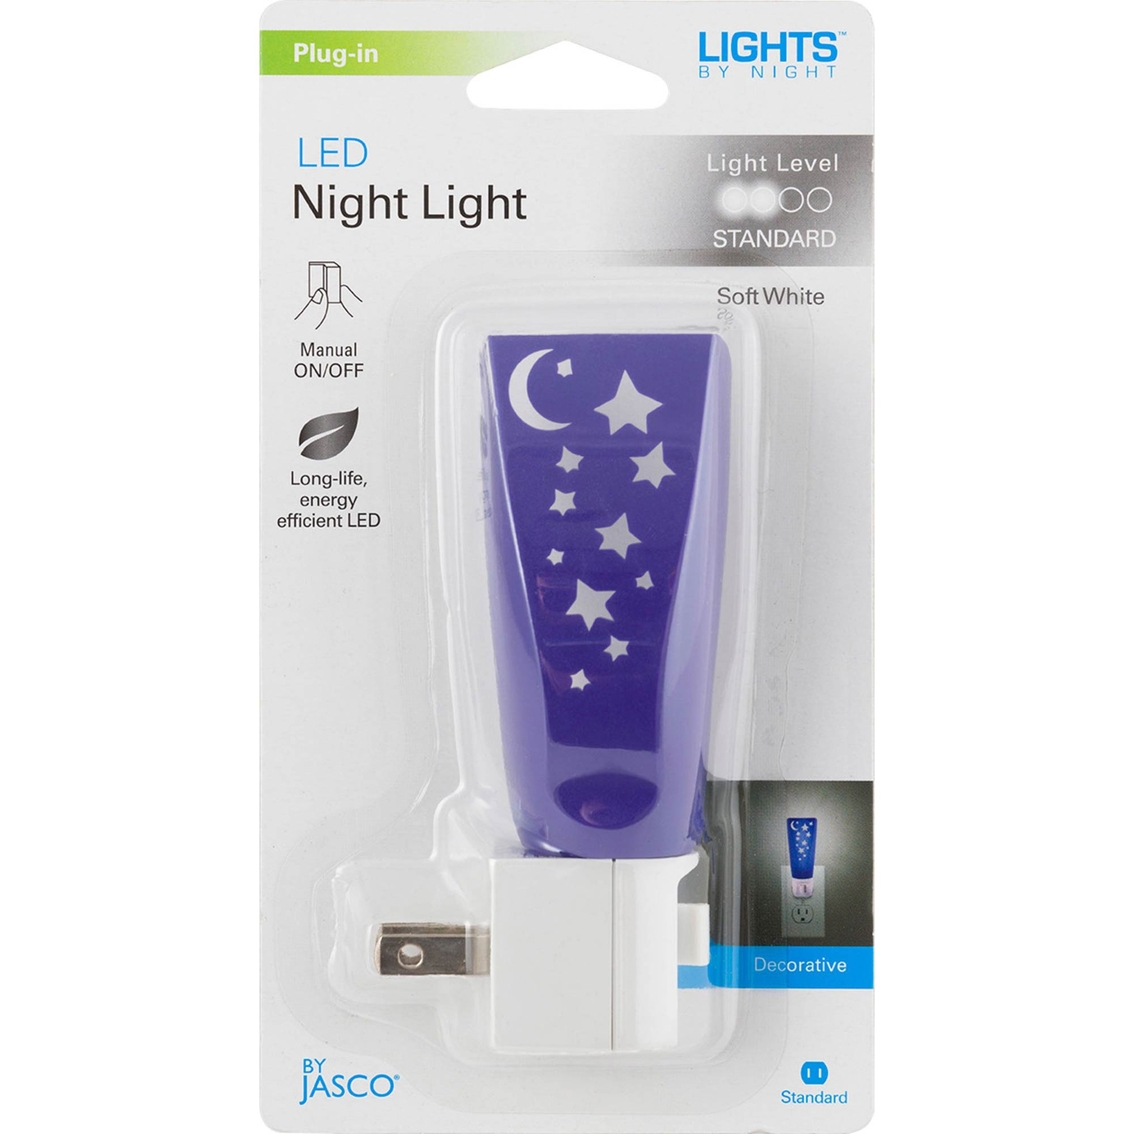 GE Lights by Nights Moon and Stars LED Night Light - Image 2 of 4